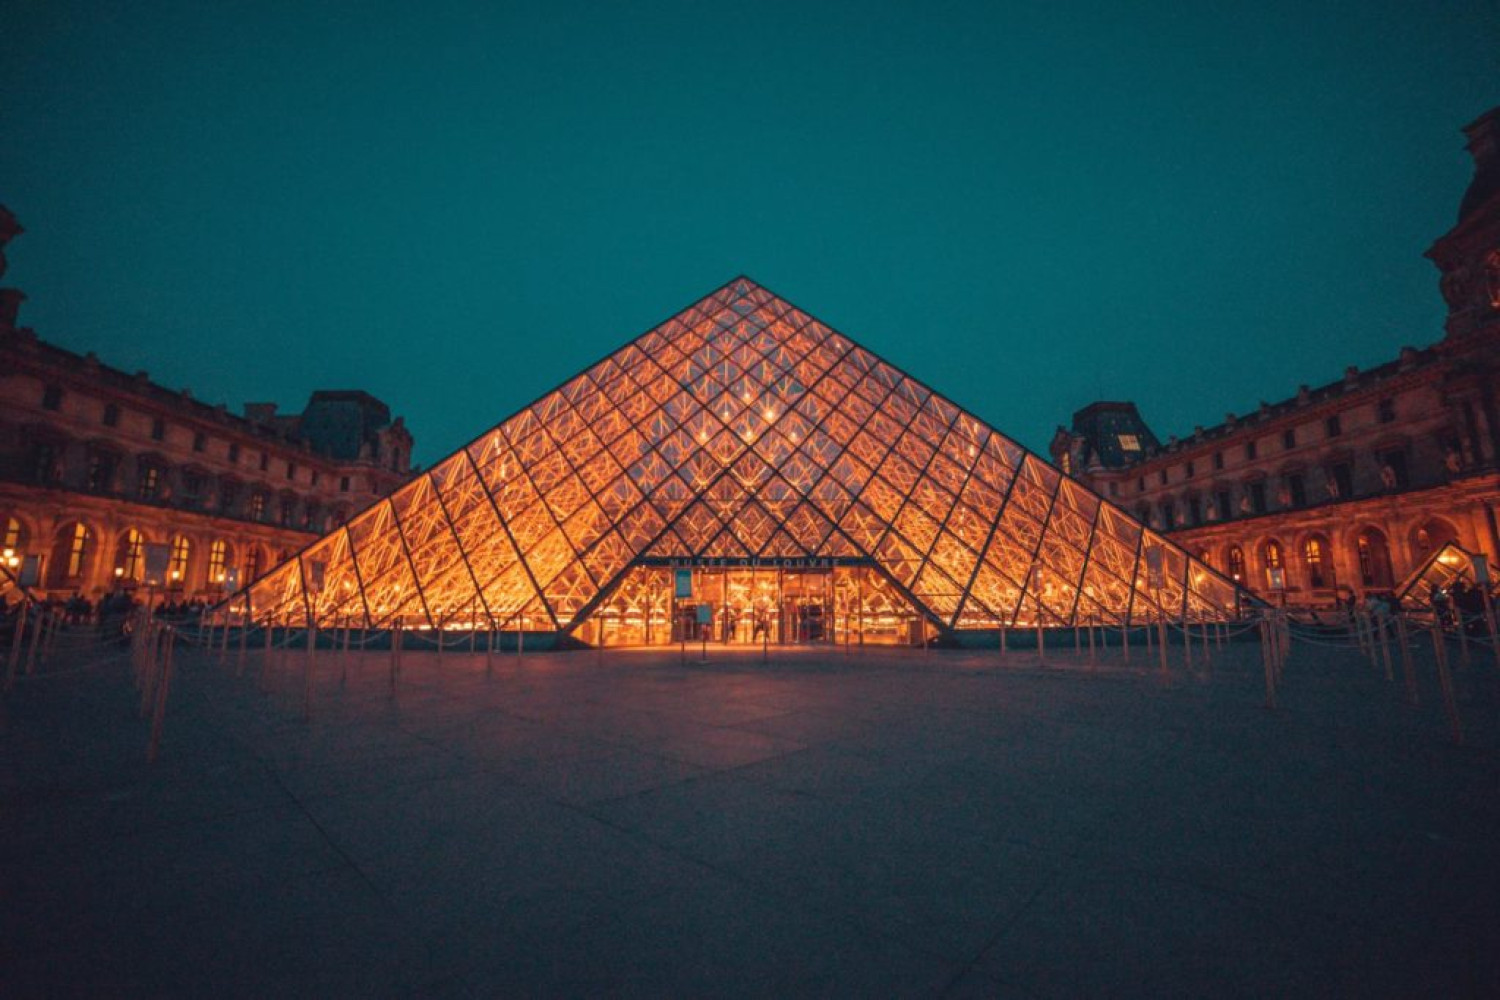 Louvre Gallery by Night - Virtual Art Gallery Tours - Home entertainment guide.